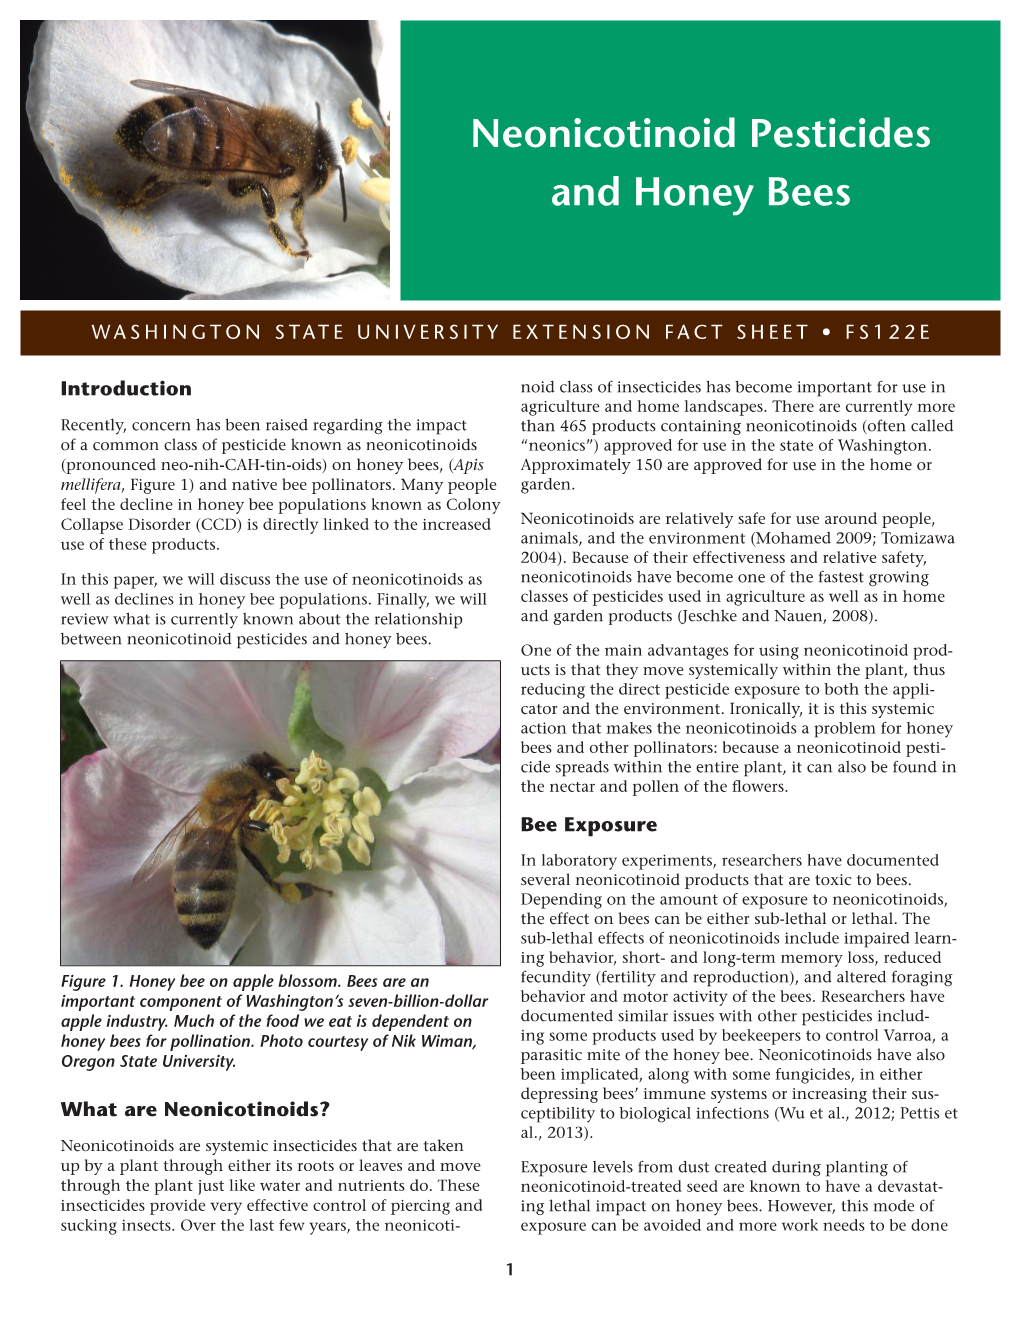 Neonicotinoid Pesticides and Honey Bees